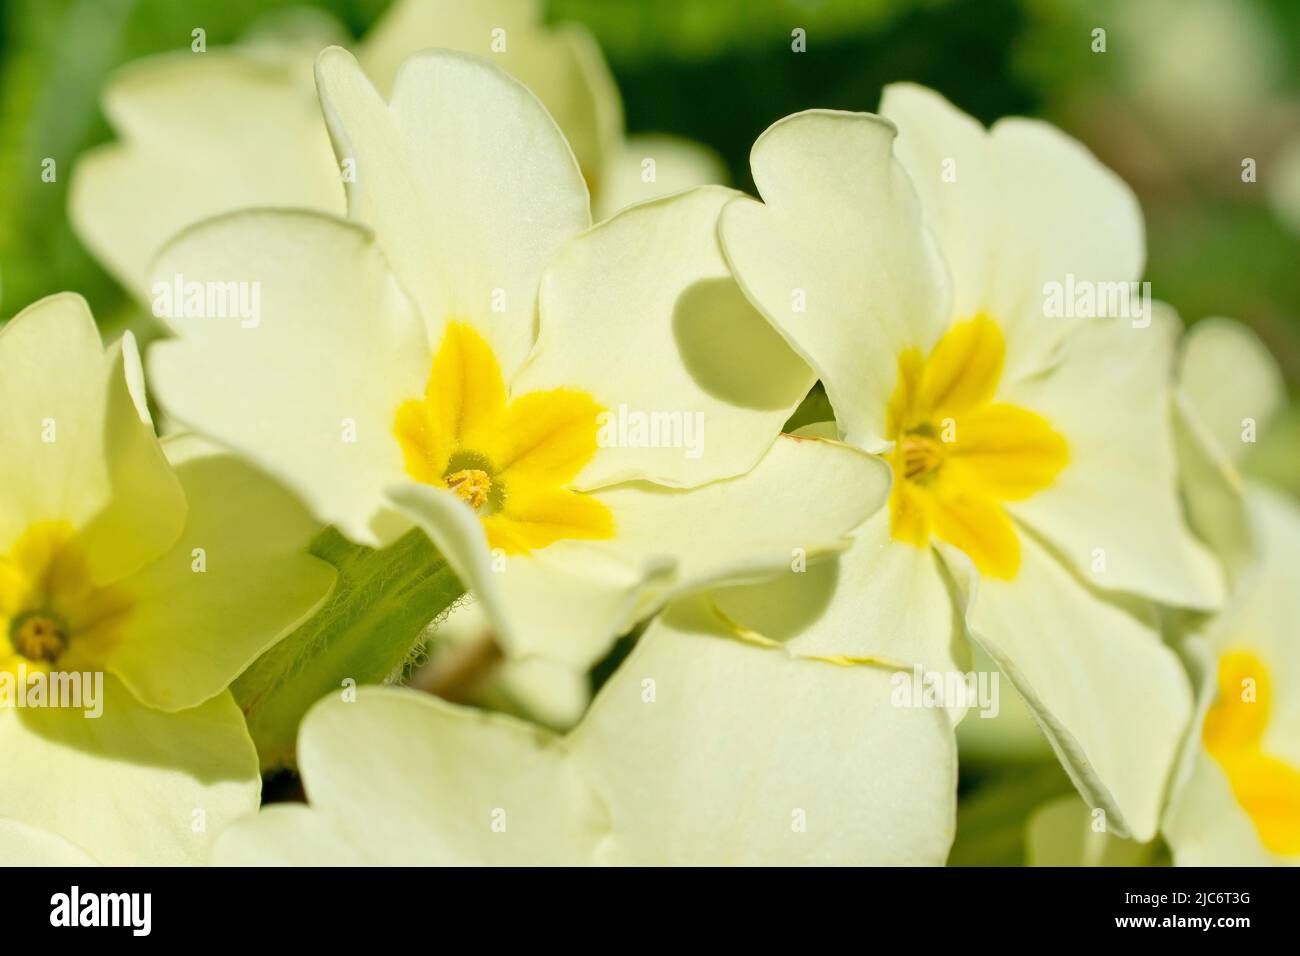 Primroses (primula vulgaris), close up focusing on a single thrum-eyed flower out of a small cluster with limited depth of field. Stock Photo